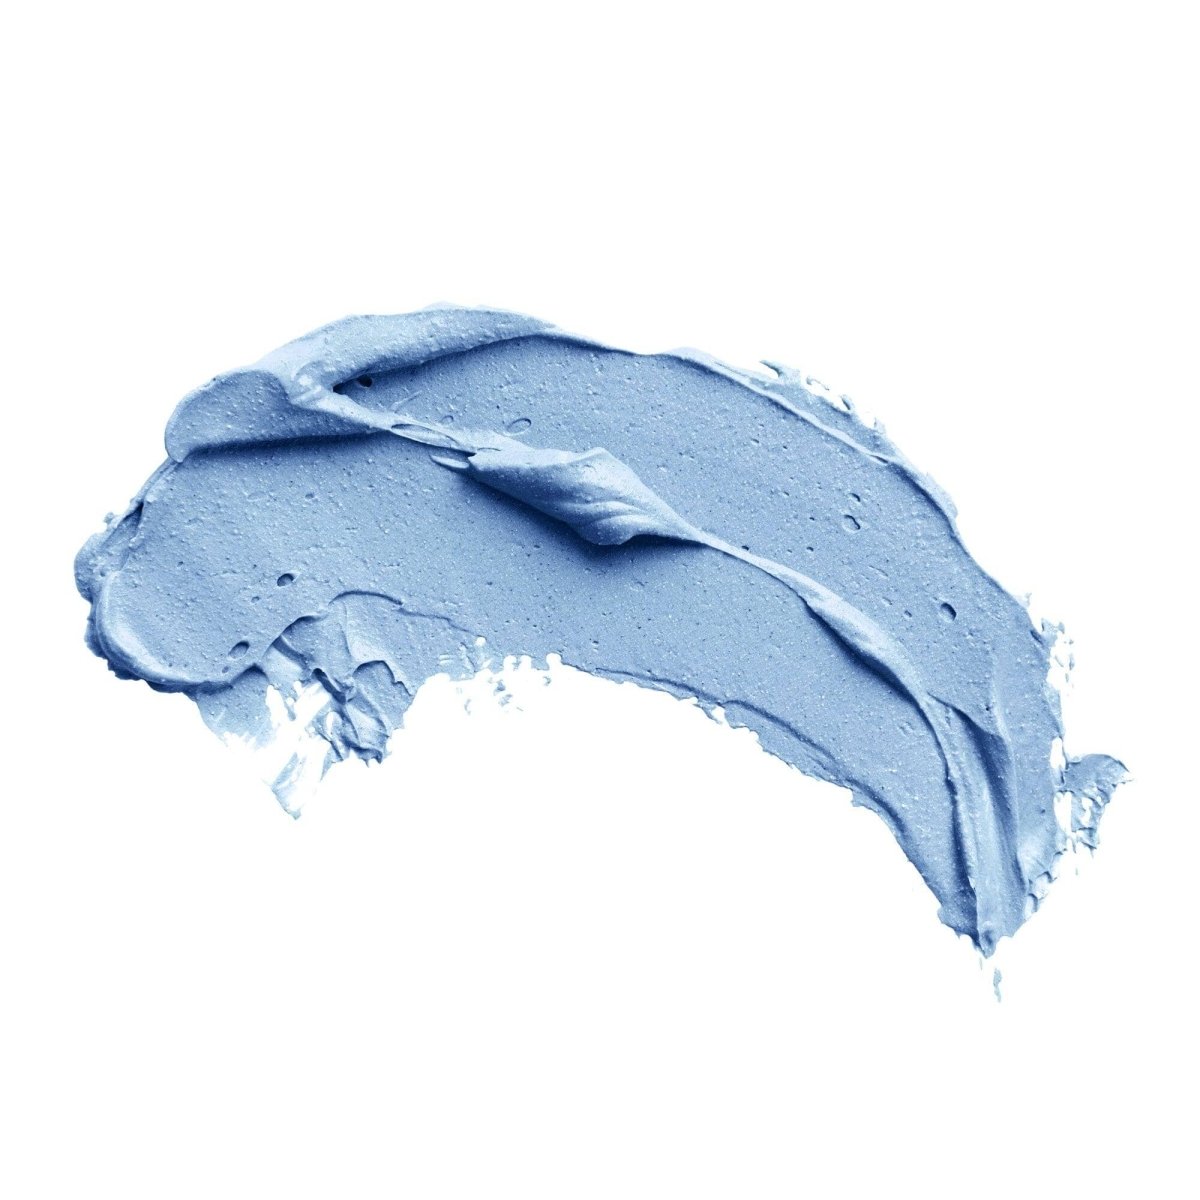 Abstract representation of the refreshing effect of the sensitive skin clay mask